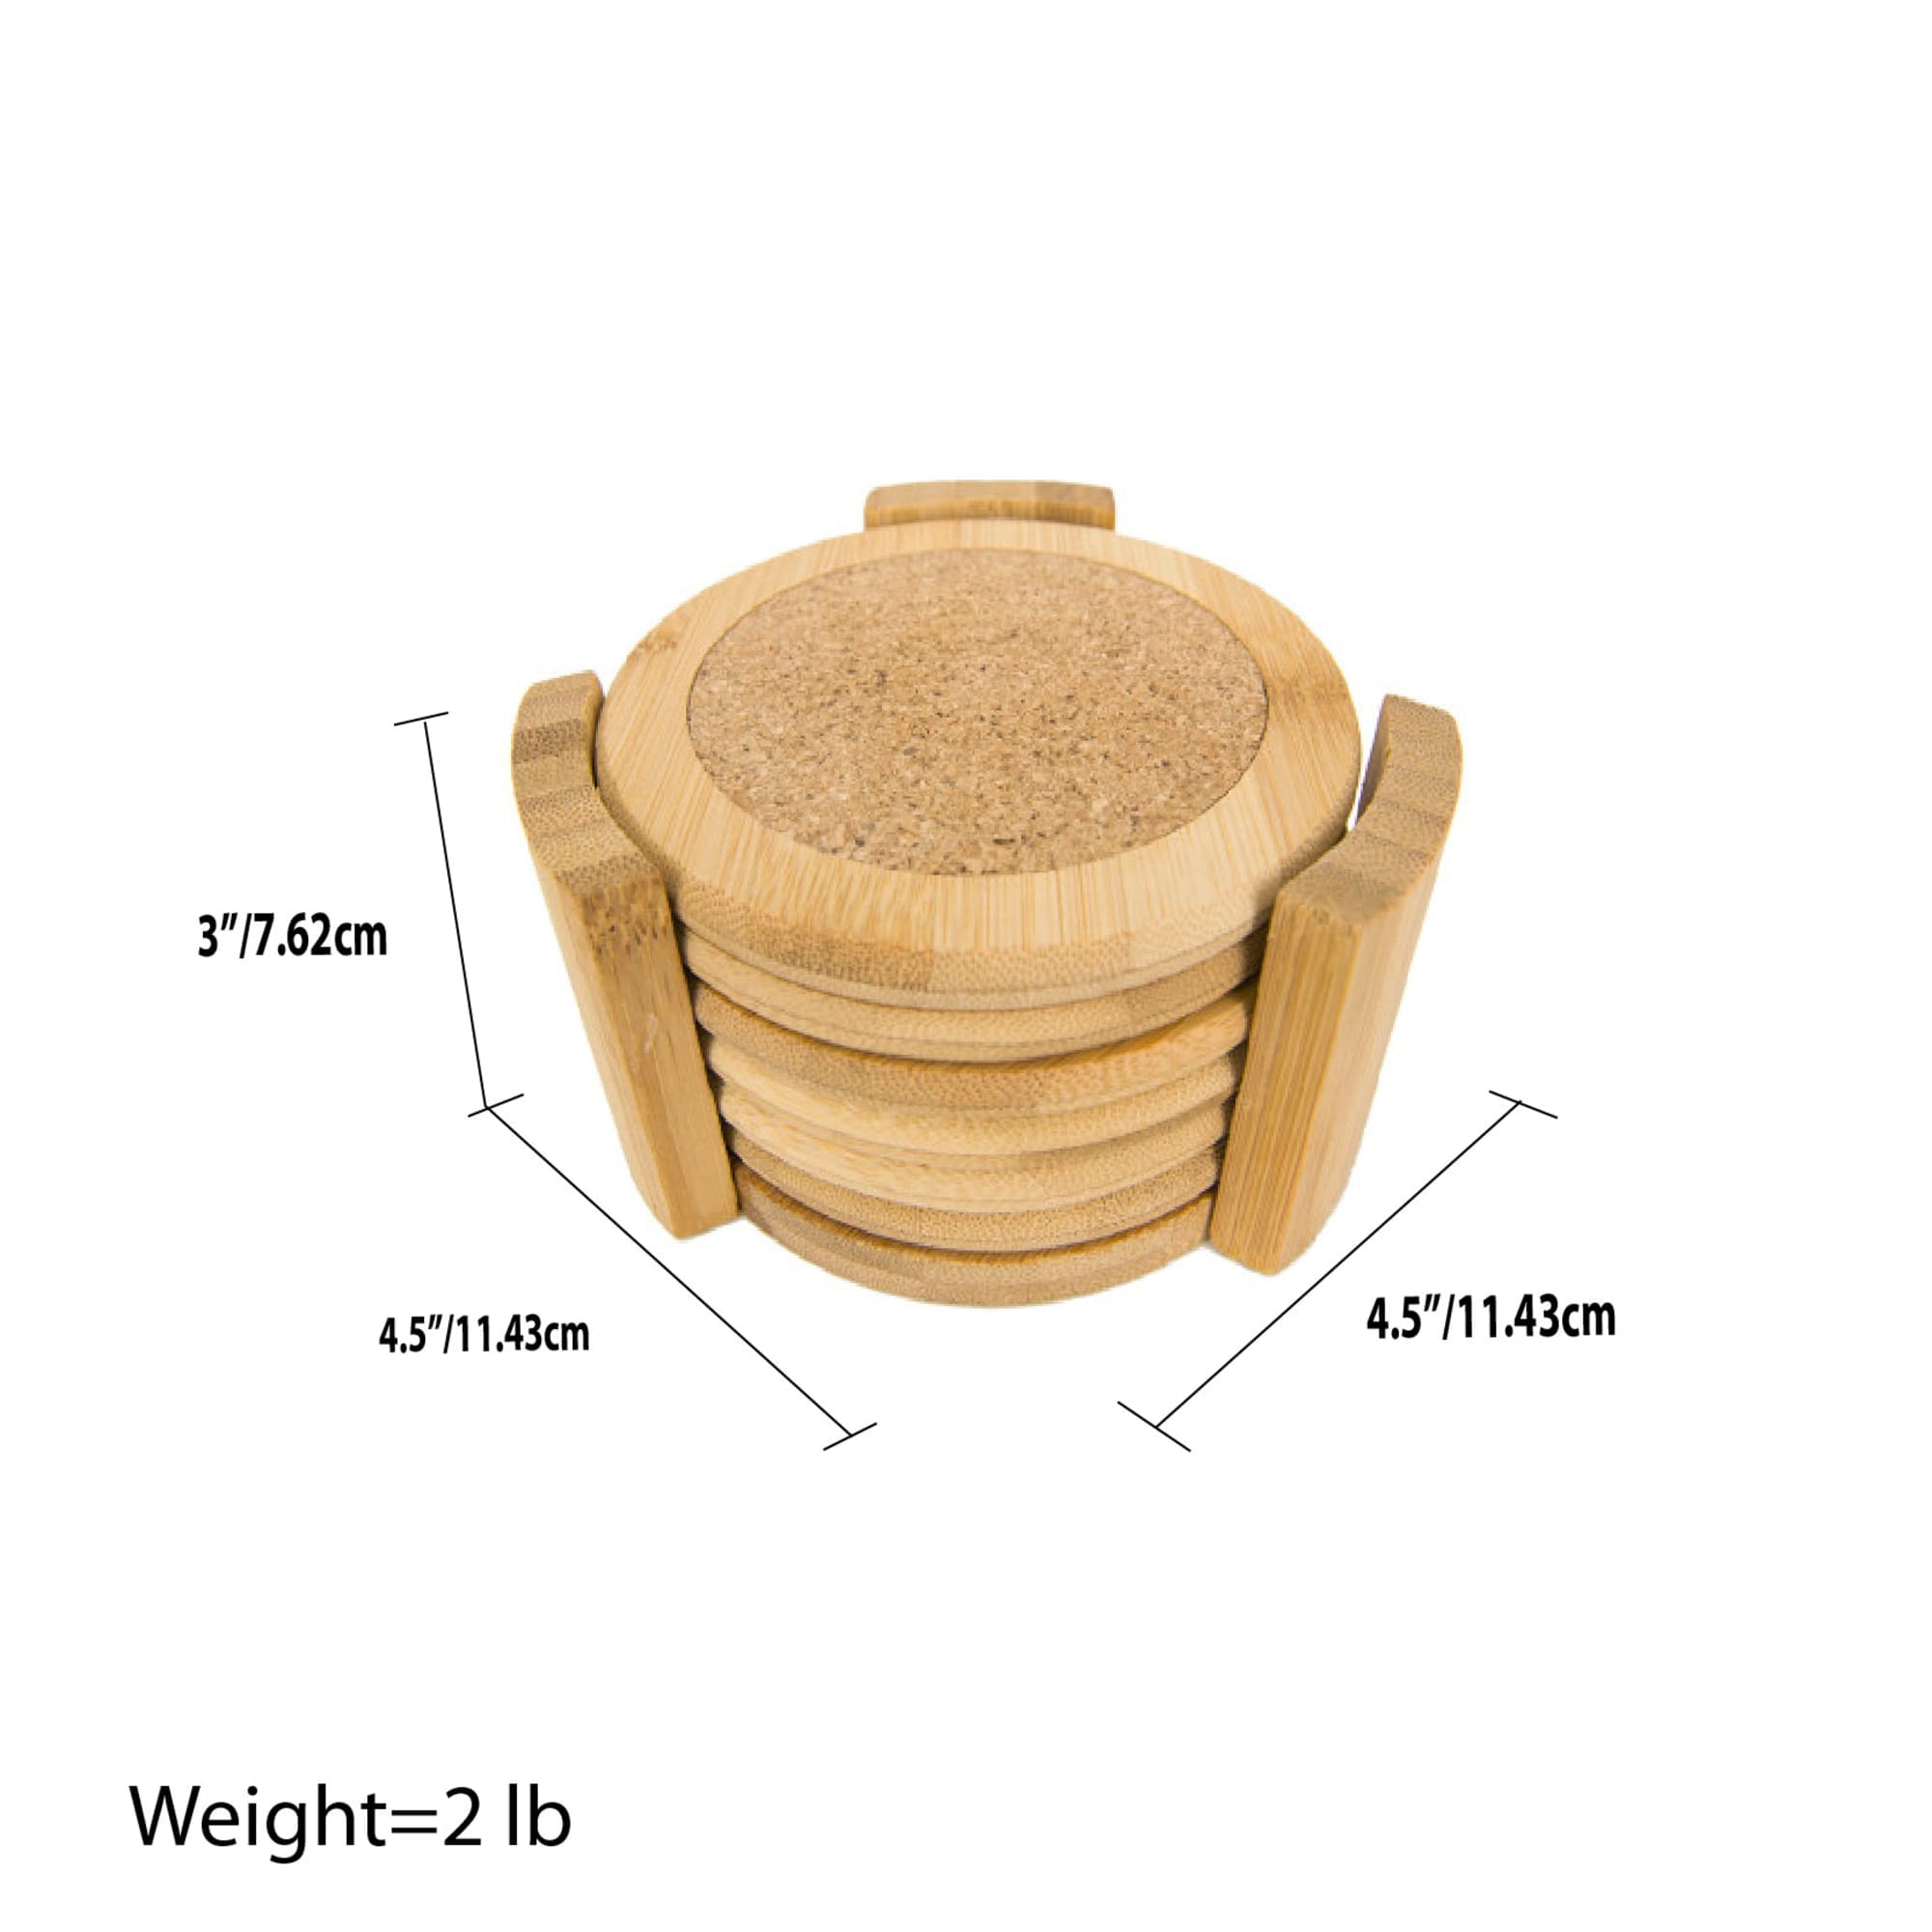 Home Basics 4.5" Bamboo Coaster Set, (Pack of 6) with Holder, Natural $7.00 EACH, CASE PACK OF 12